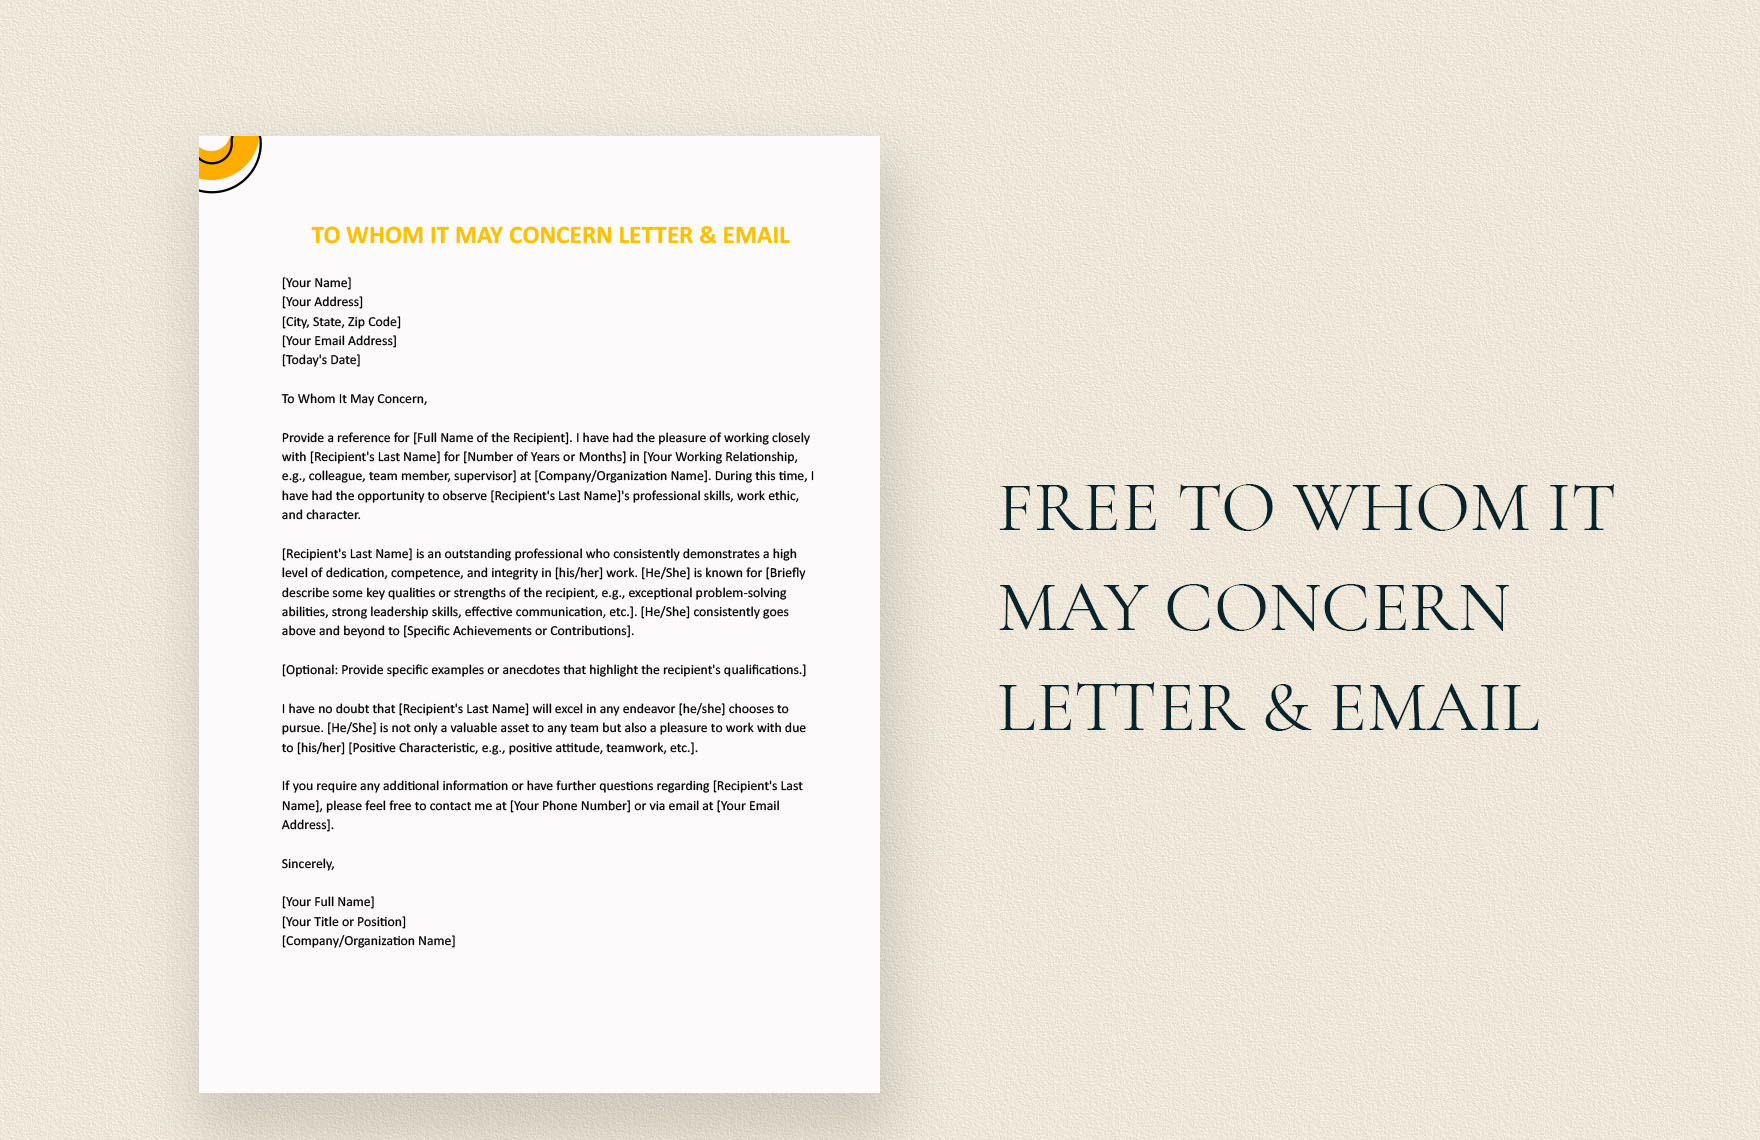 To Whom It May Concern Letter & Email in Word, Google Docs